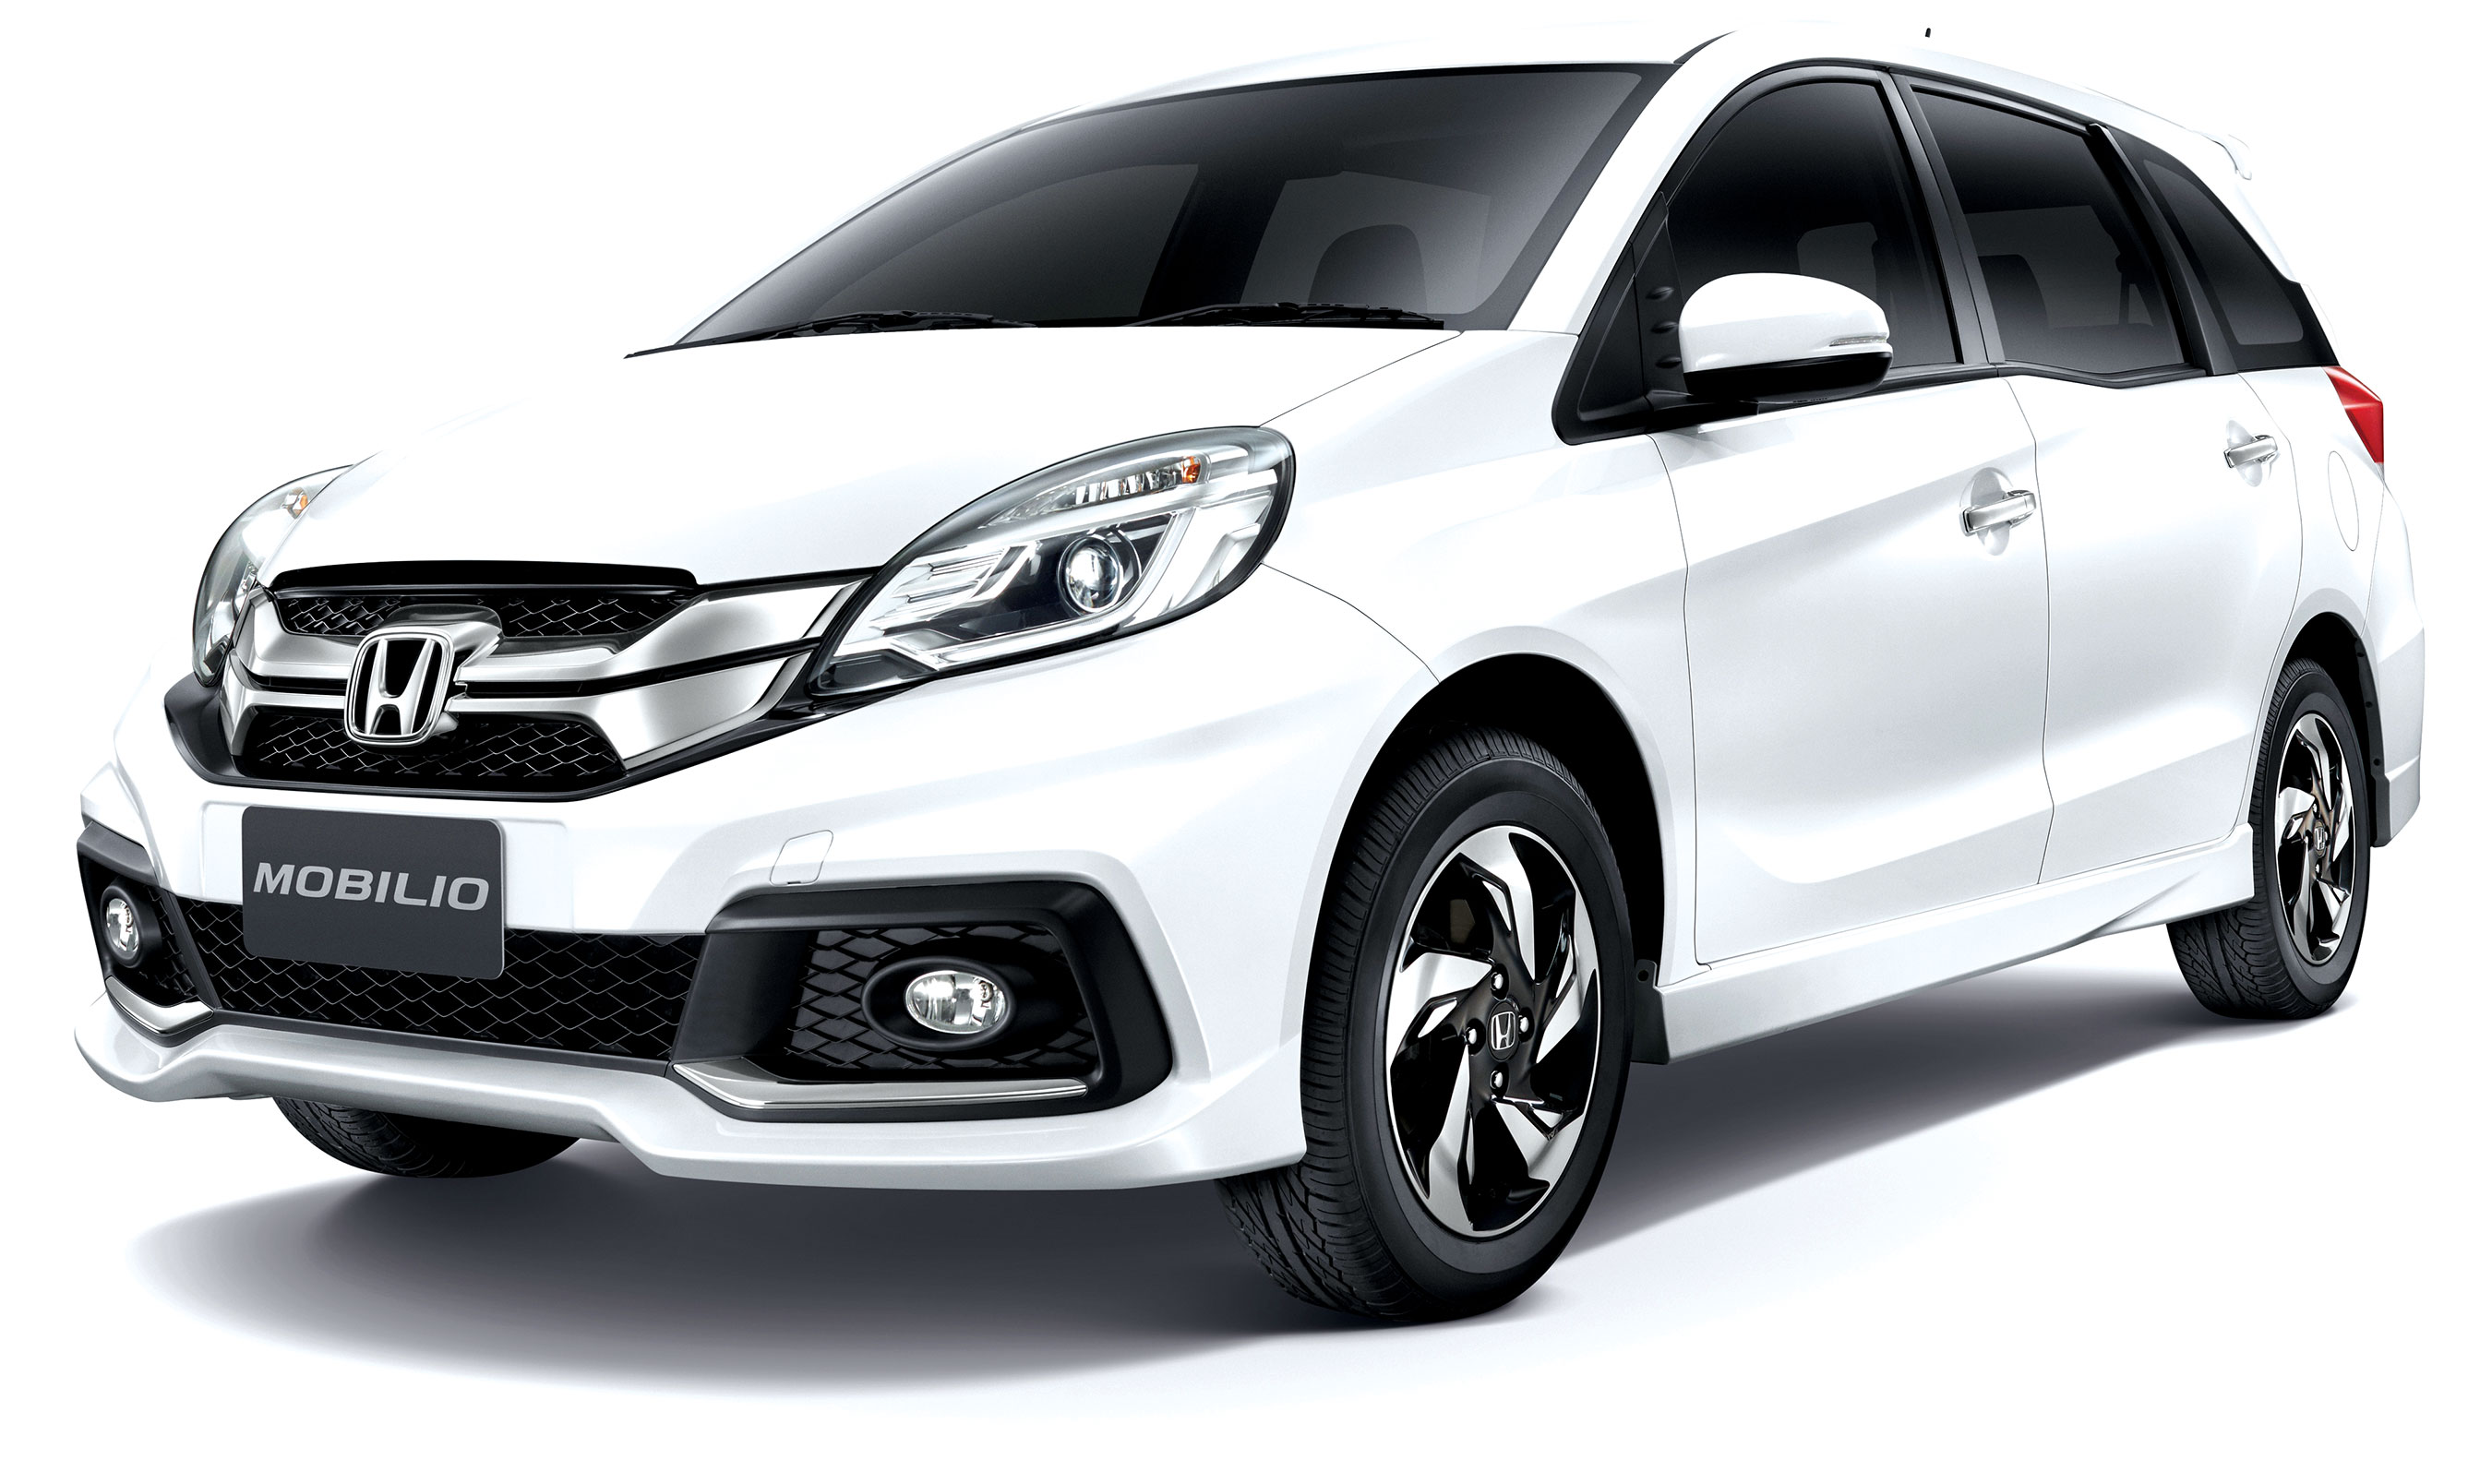 Honda Halts The Production Of Mobilio Mpv In India